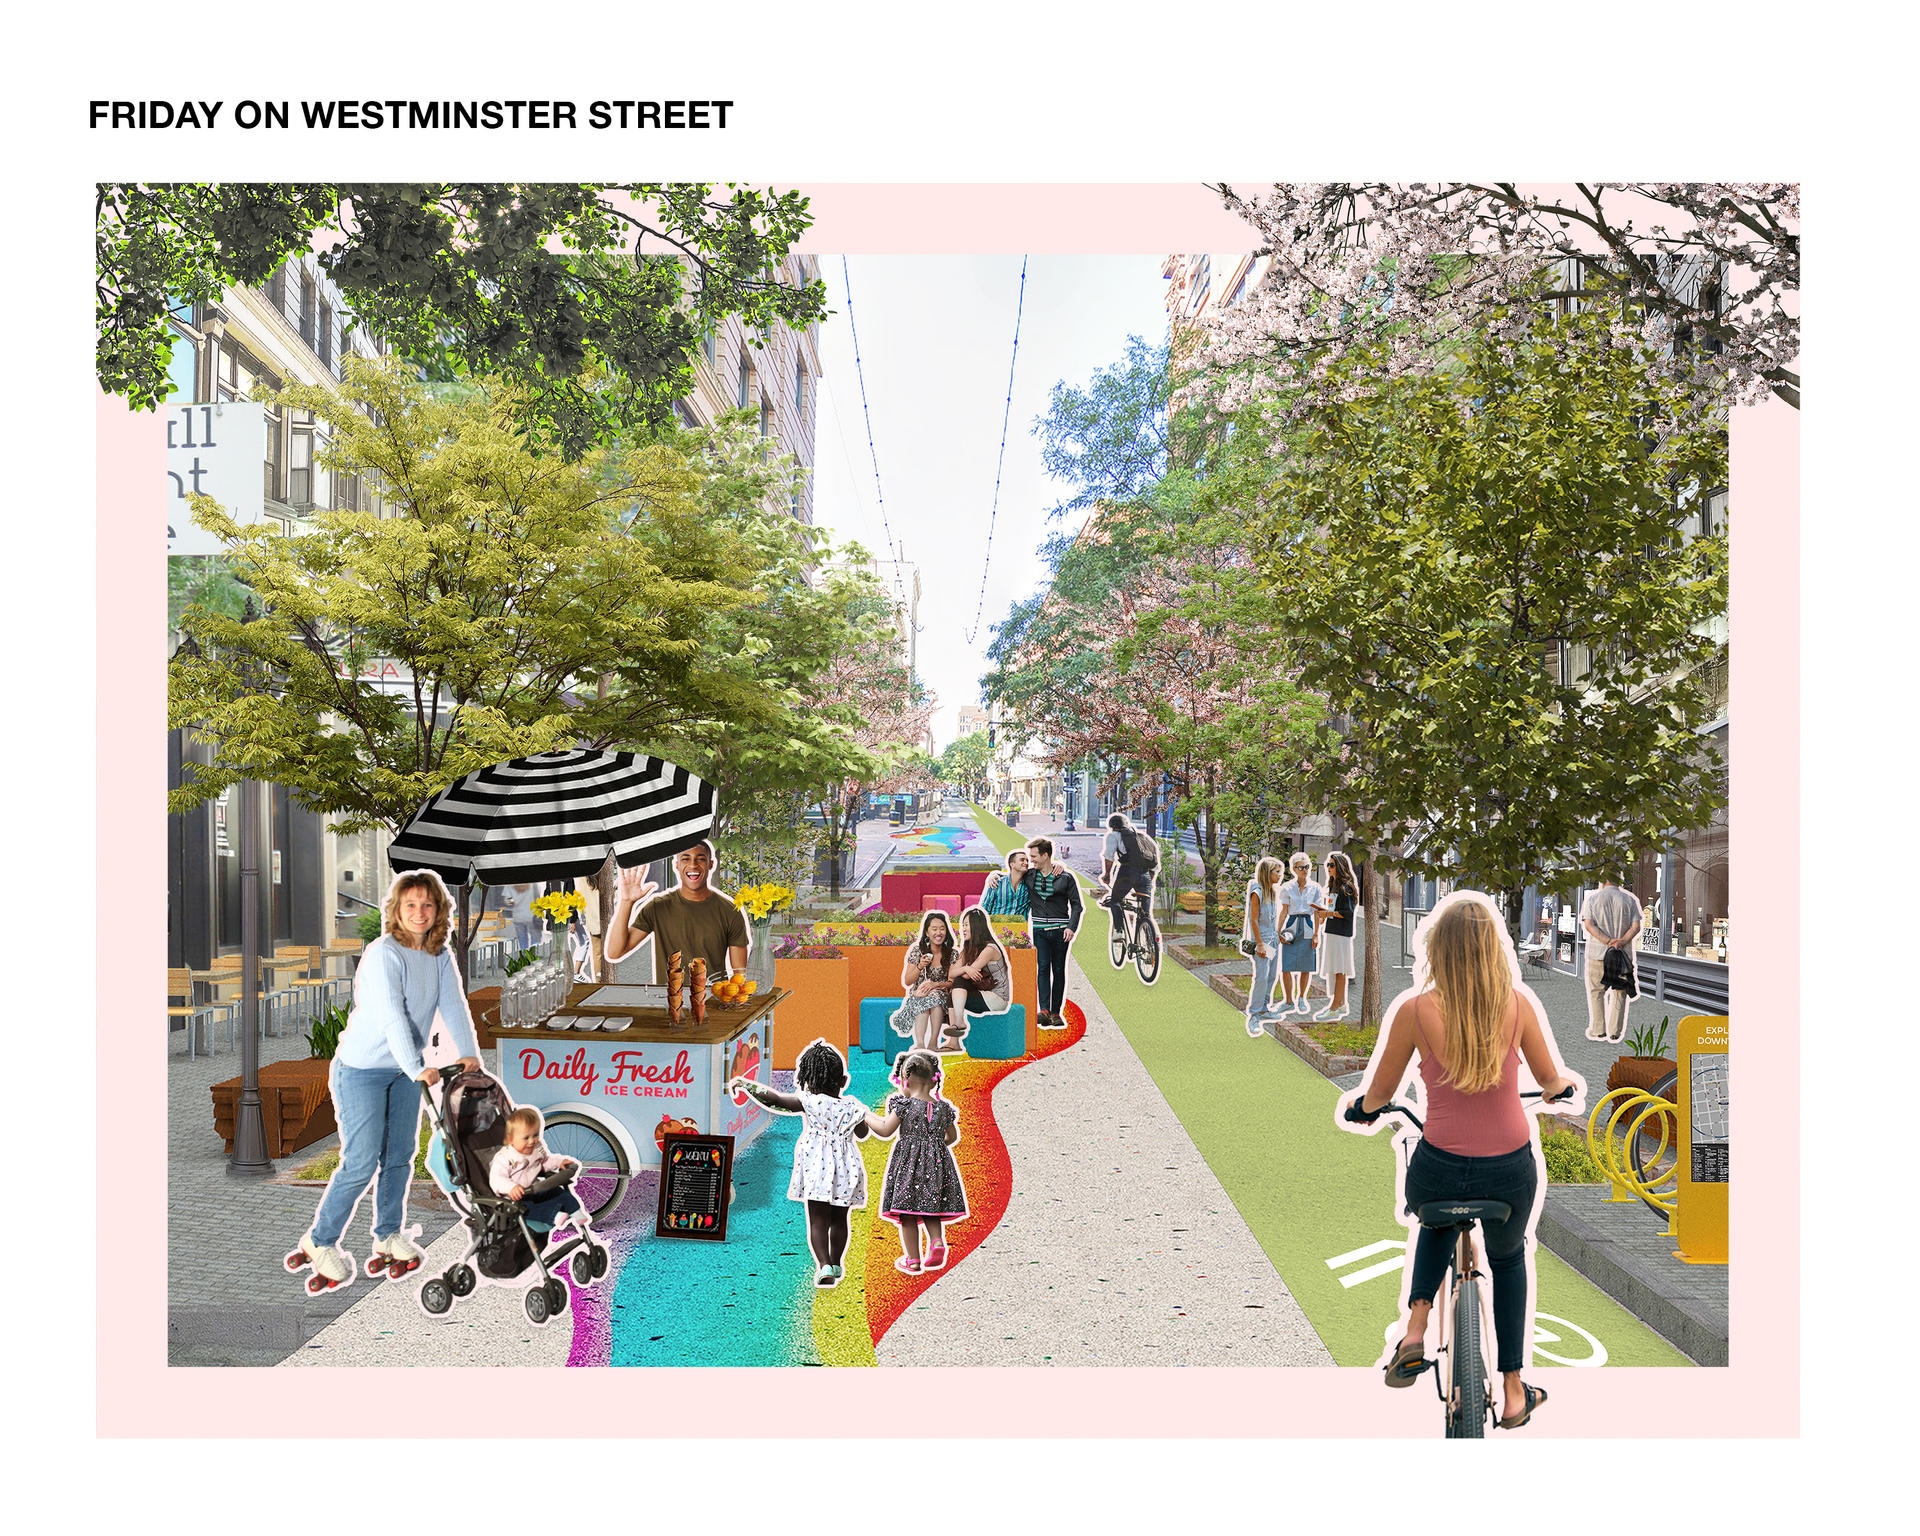 Pop-up food stalls on a pedestrian-only street with ample flexible seating opportunities. 